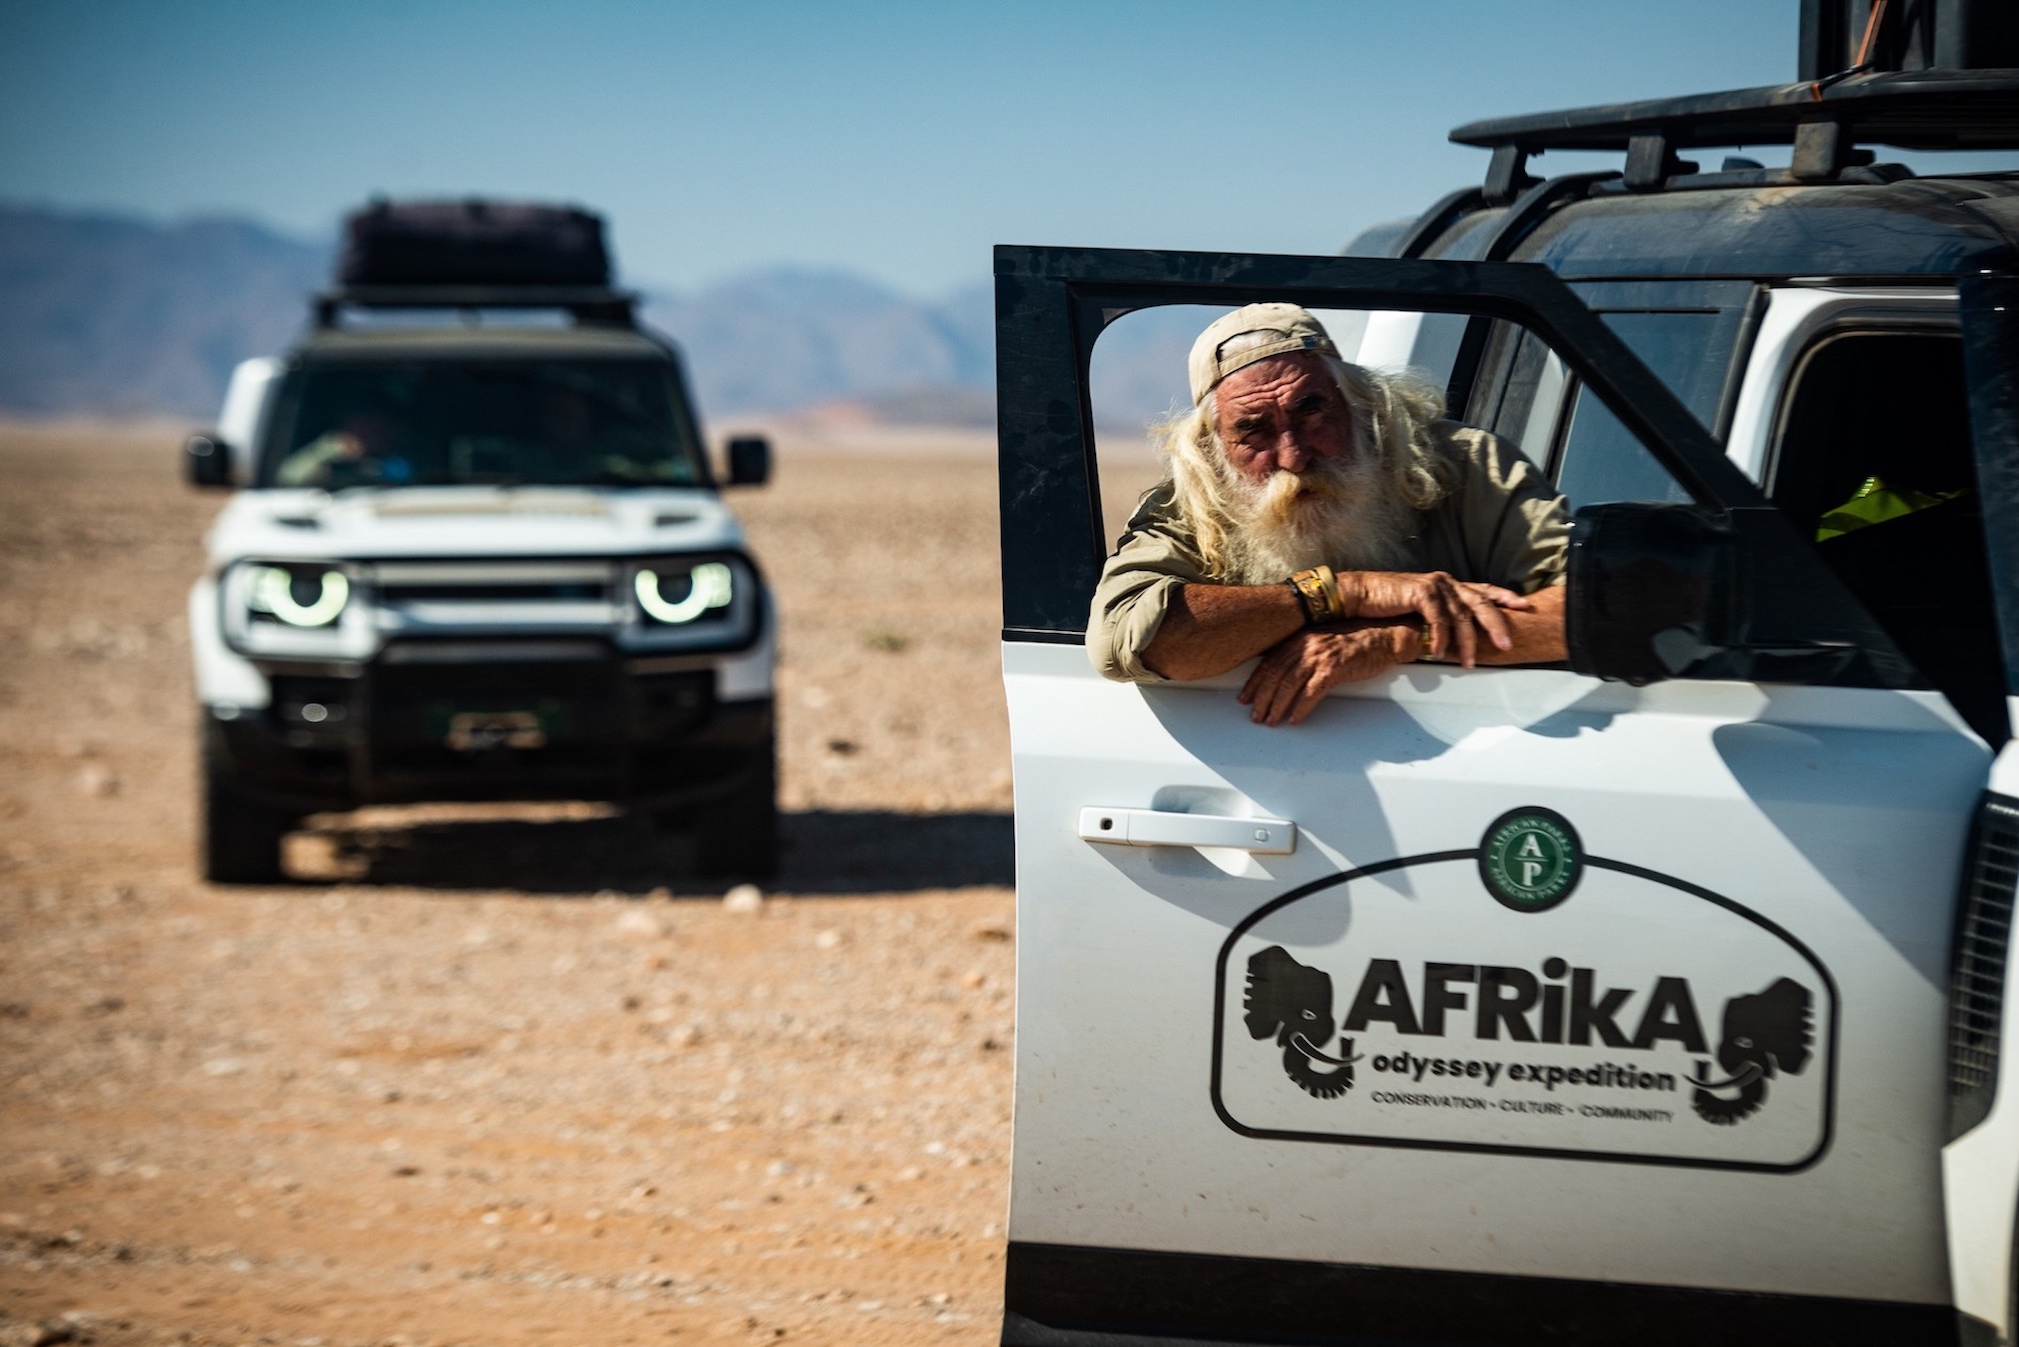 Going Wild With Hope – Kingsley Holgate Sets Off On Legendary 41st Expedition